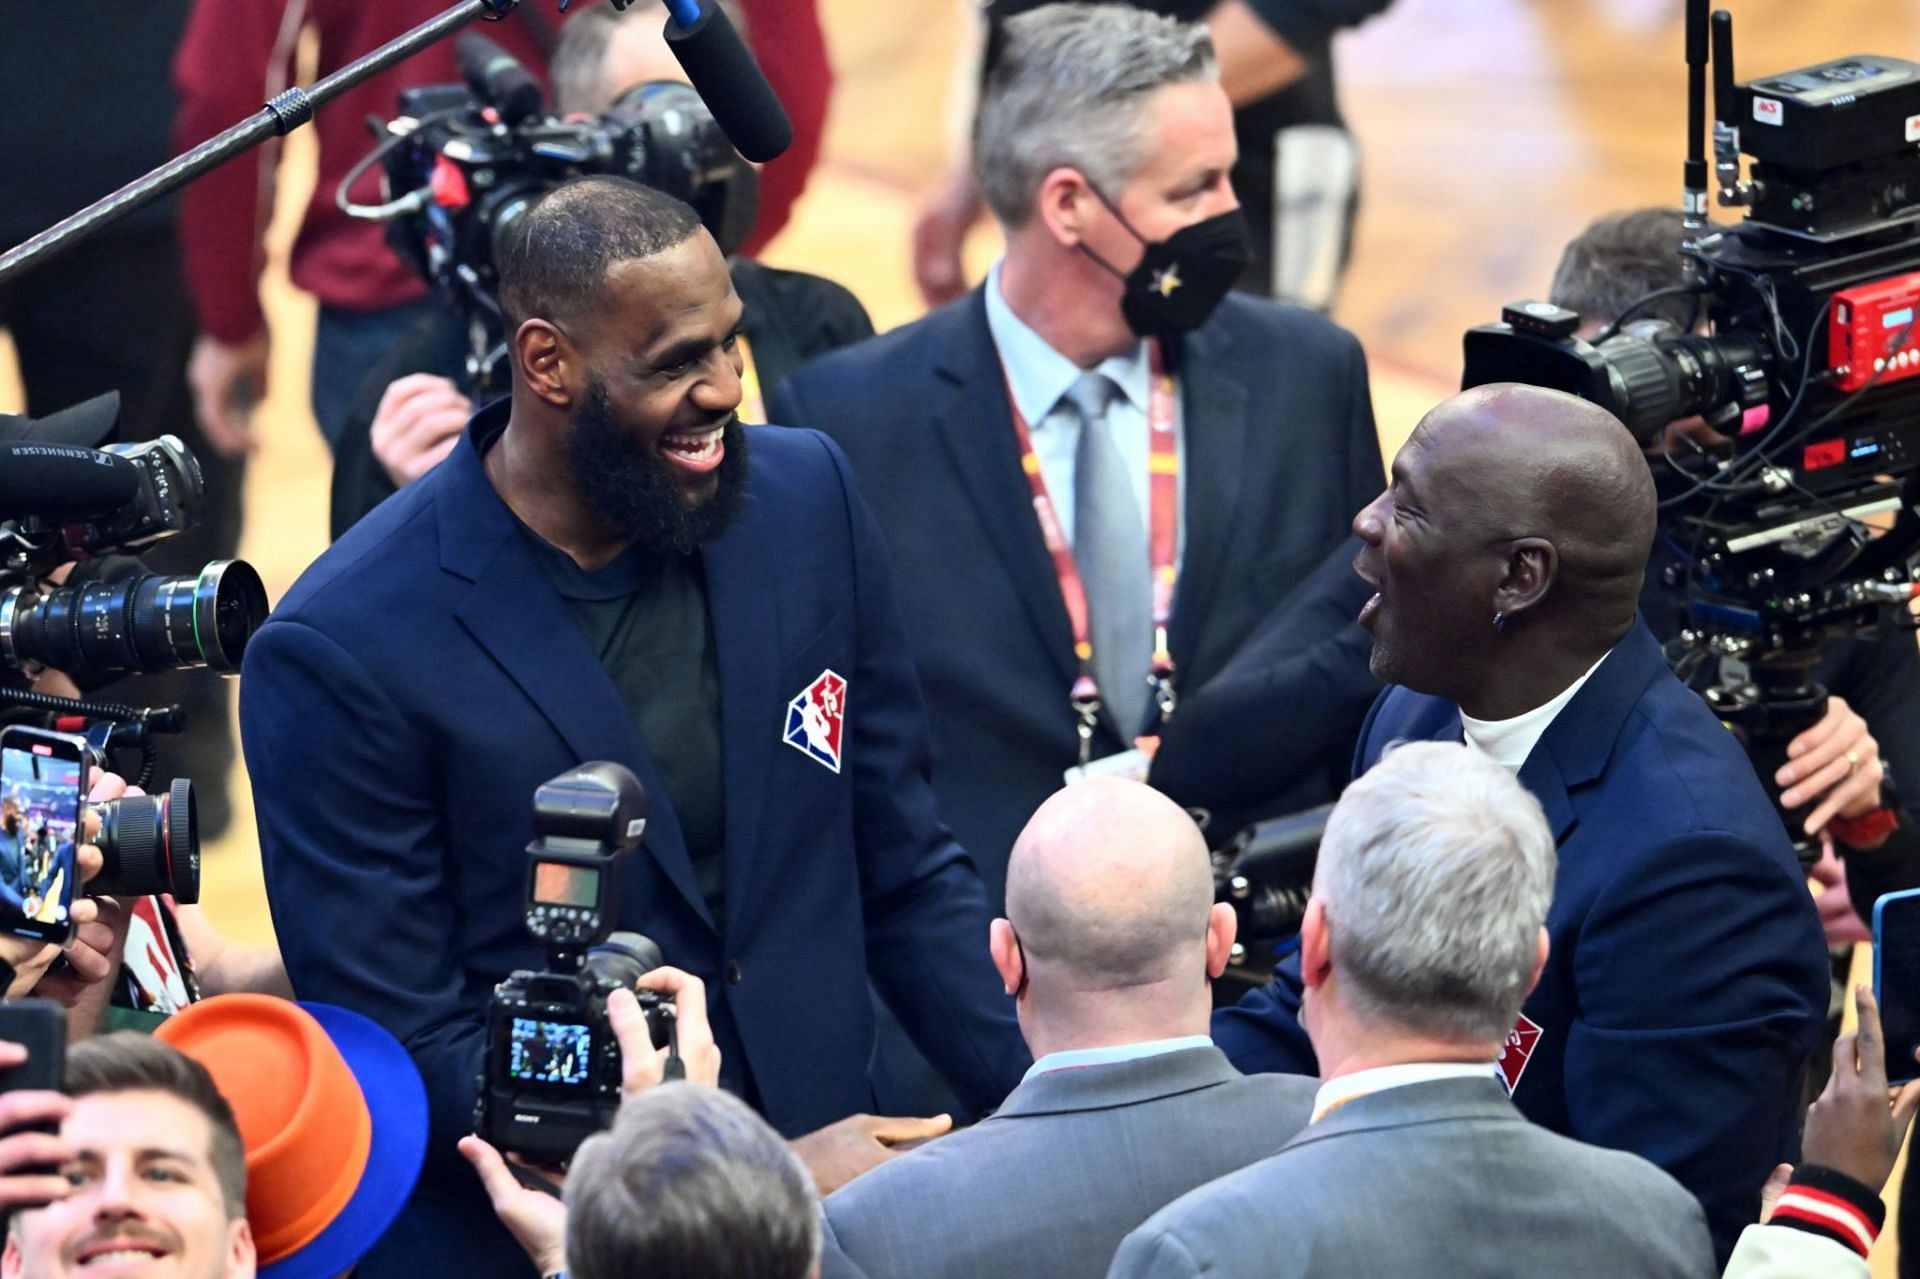 Michael Jordan and LeBron James shared a rare but long embrace before the start of the 2022 All-Star Game. [Photo: The Spun]